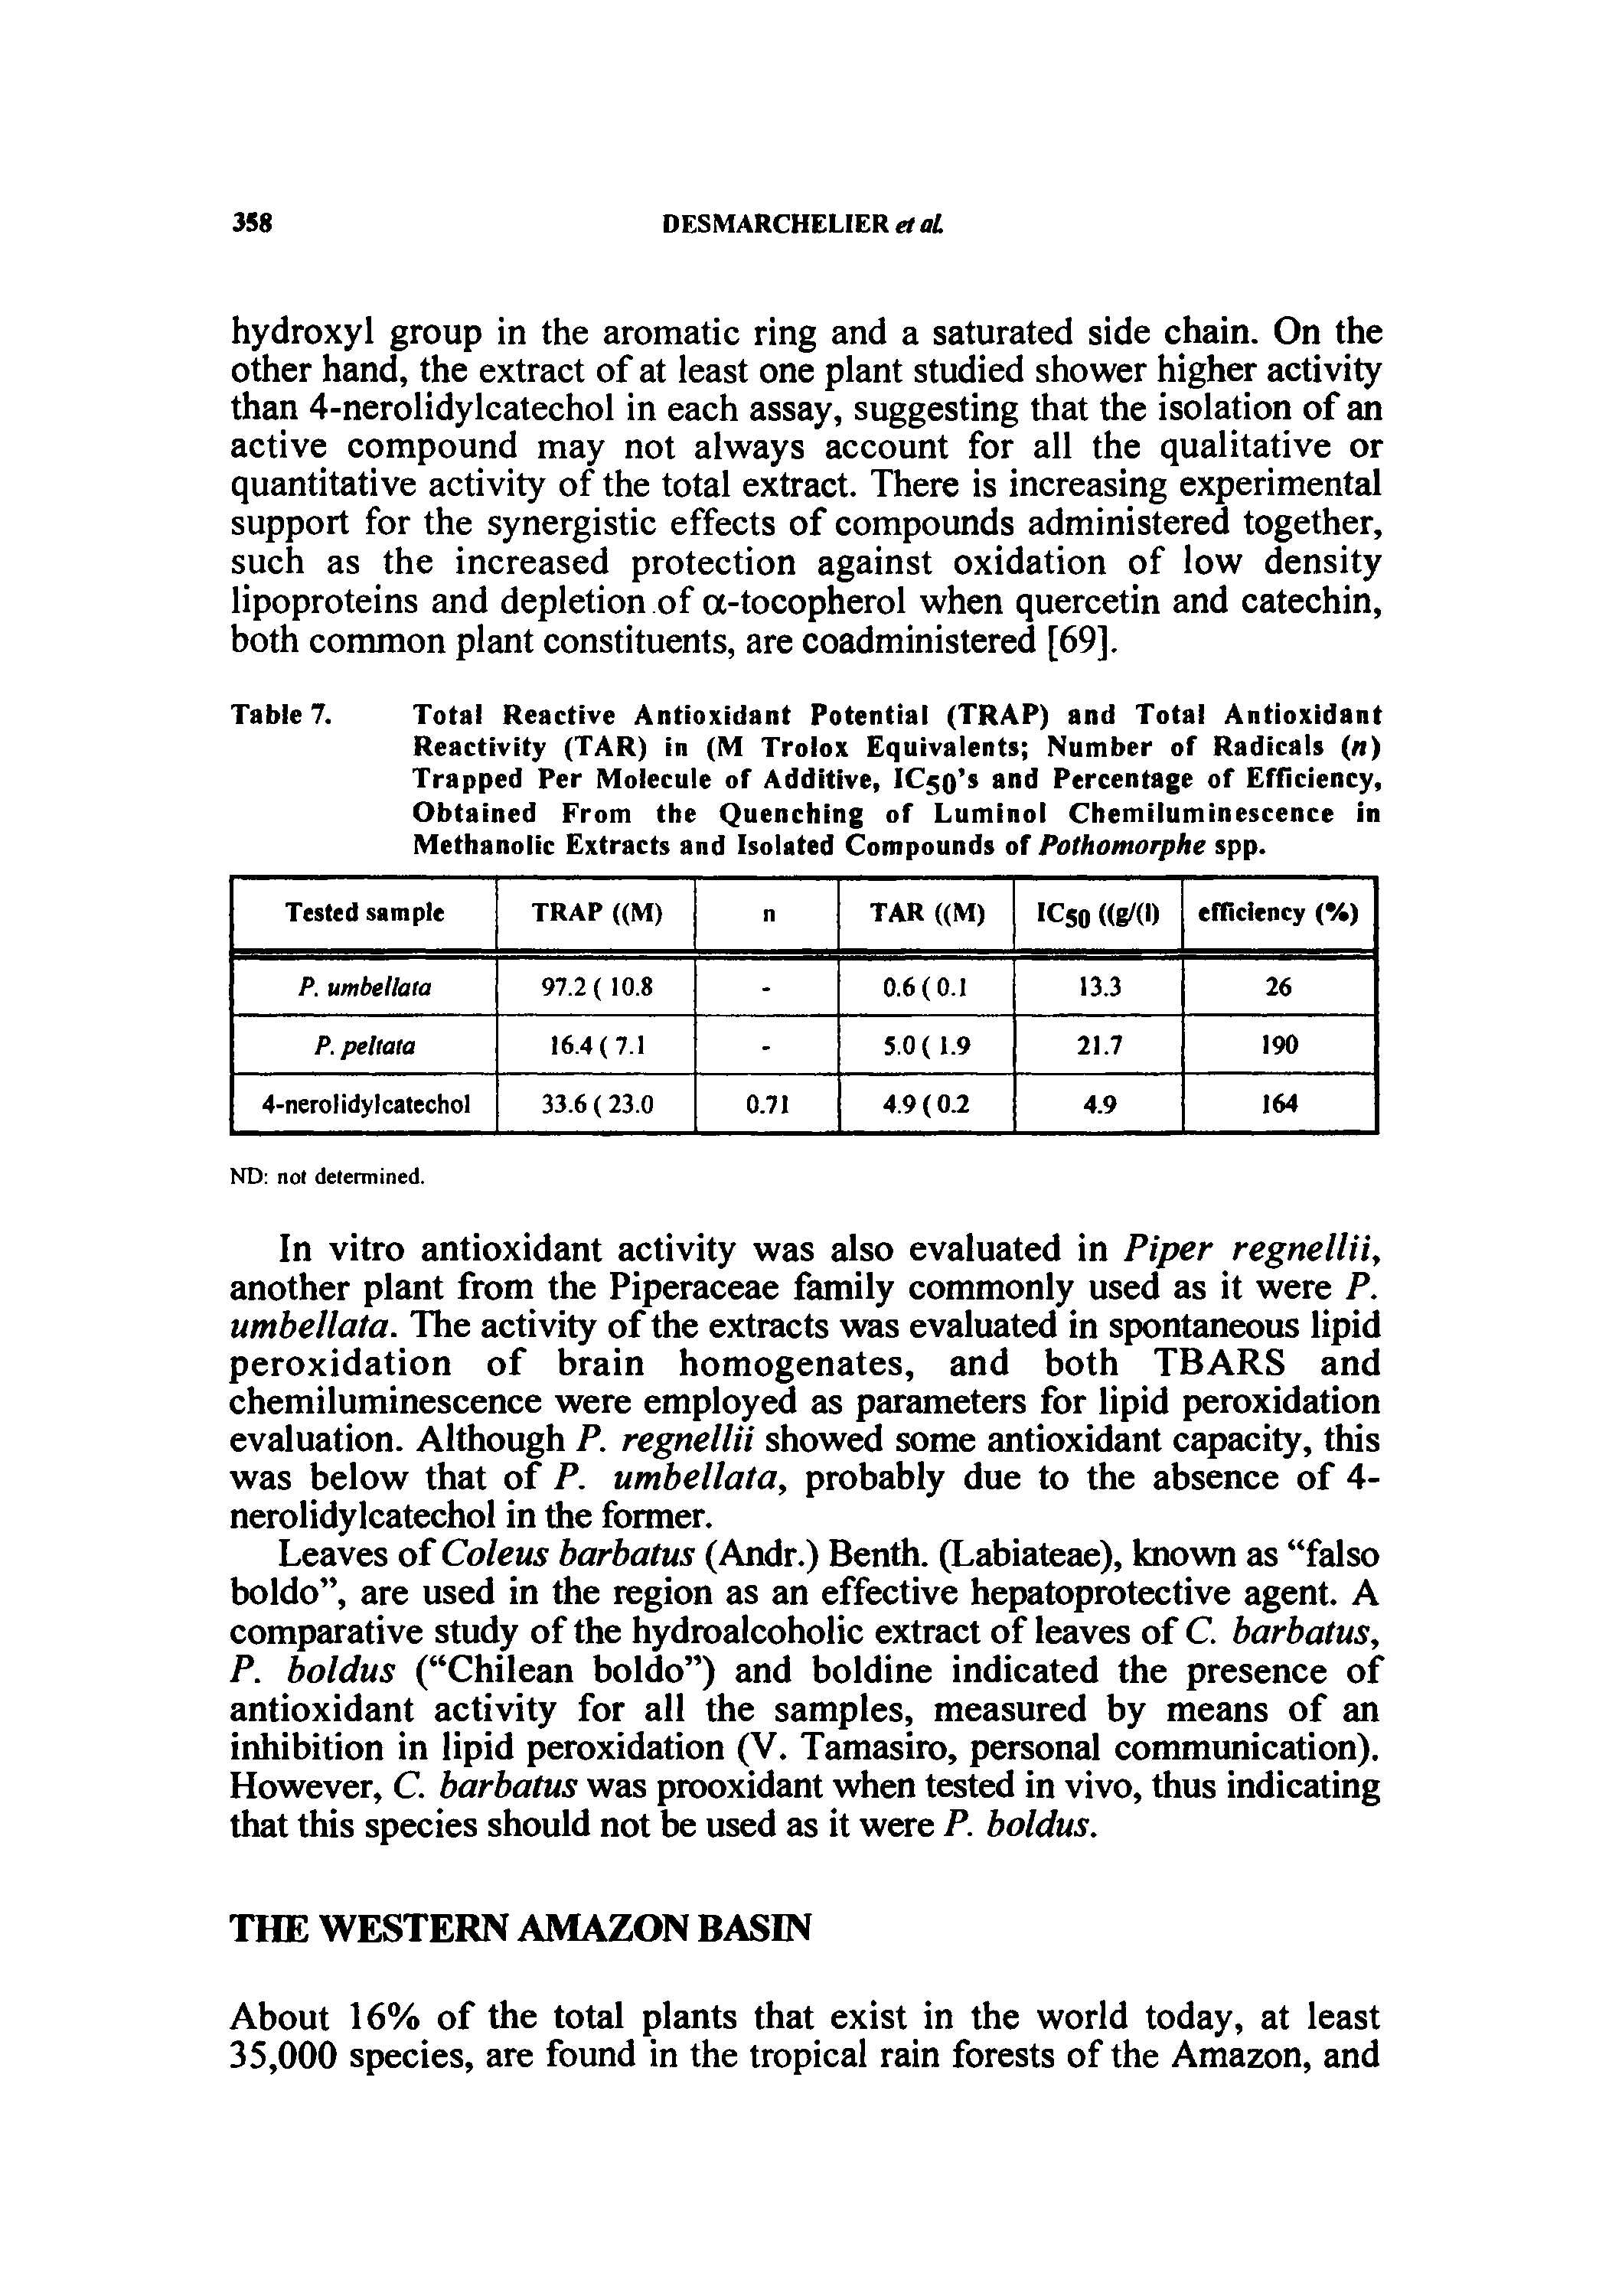 Table 7. Total Reactive Antioxidant Potential (TRAP) and Total Antioxidant Reactivity (TAR) in (M Trolox Equivalents Number of Radicals (n) Trapped Per Molecule of Additive, ICso s and Percentage of Efficiency, Obtained From the Quenching of Luminol Chemiluminescence in Methanolic Extracts and Isolated Compounds of Pothomorphe spp.